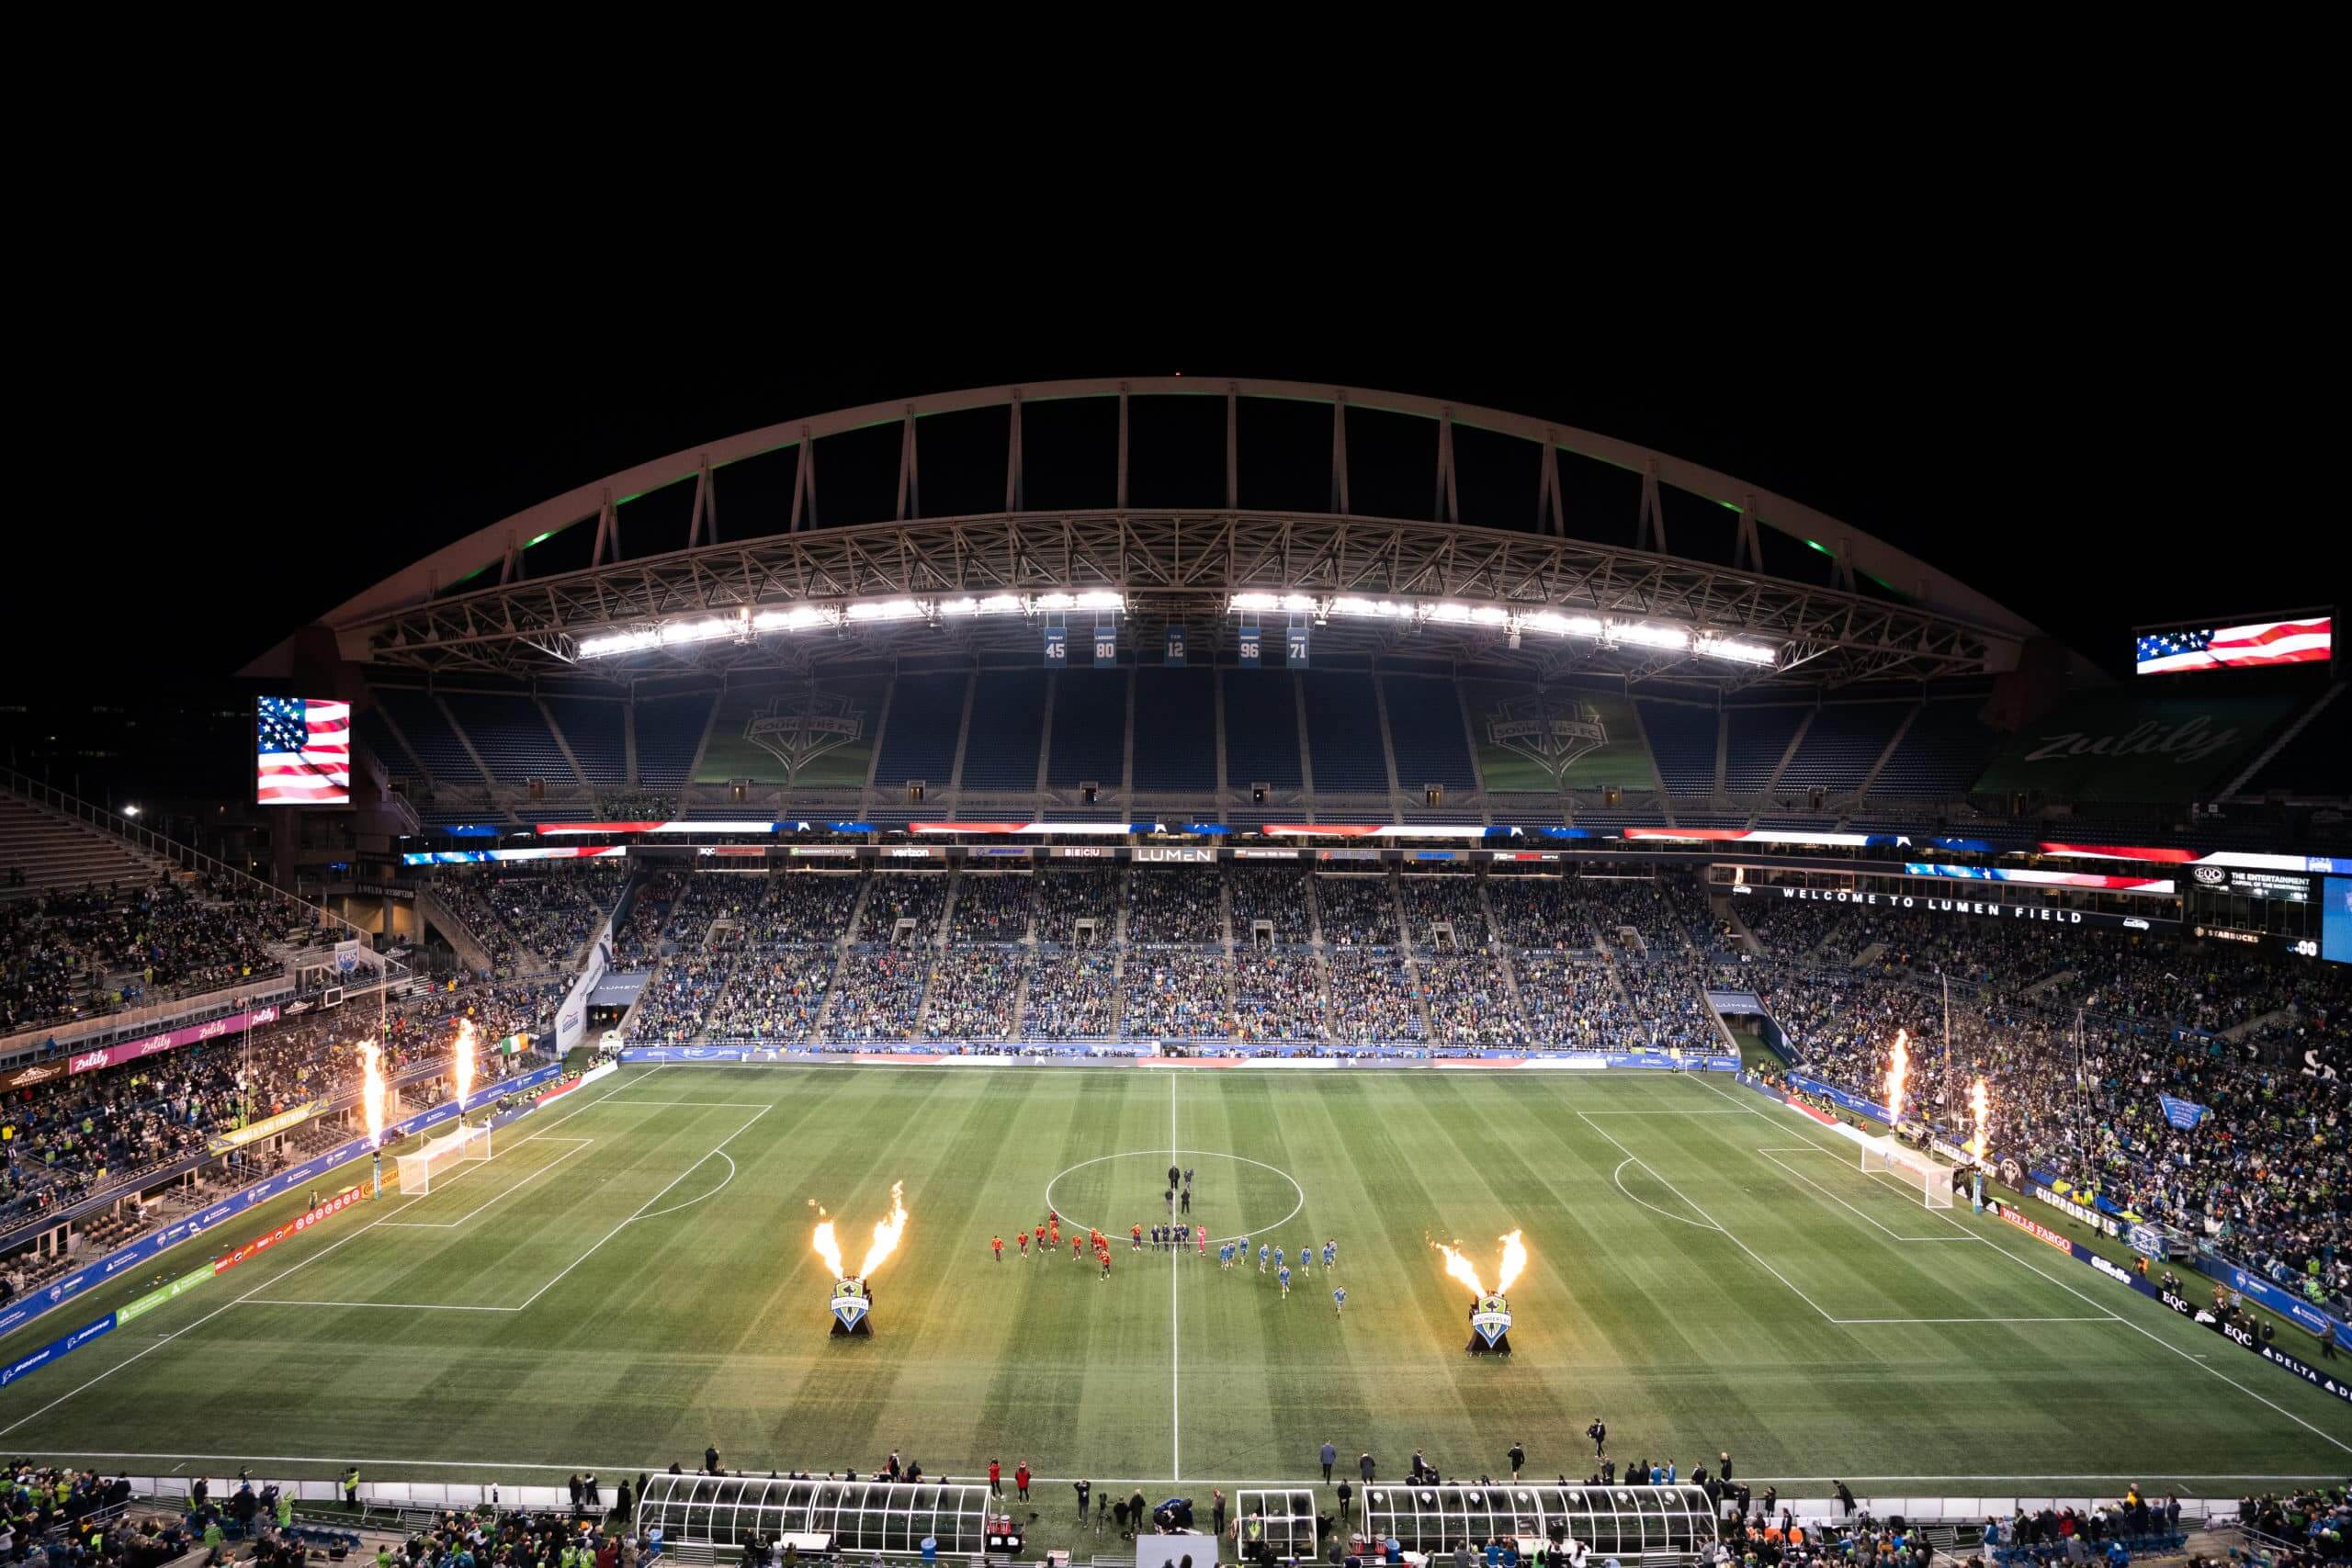 Seattle sounder stadium with fans at night